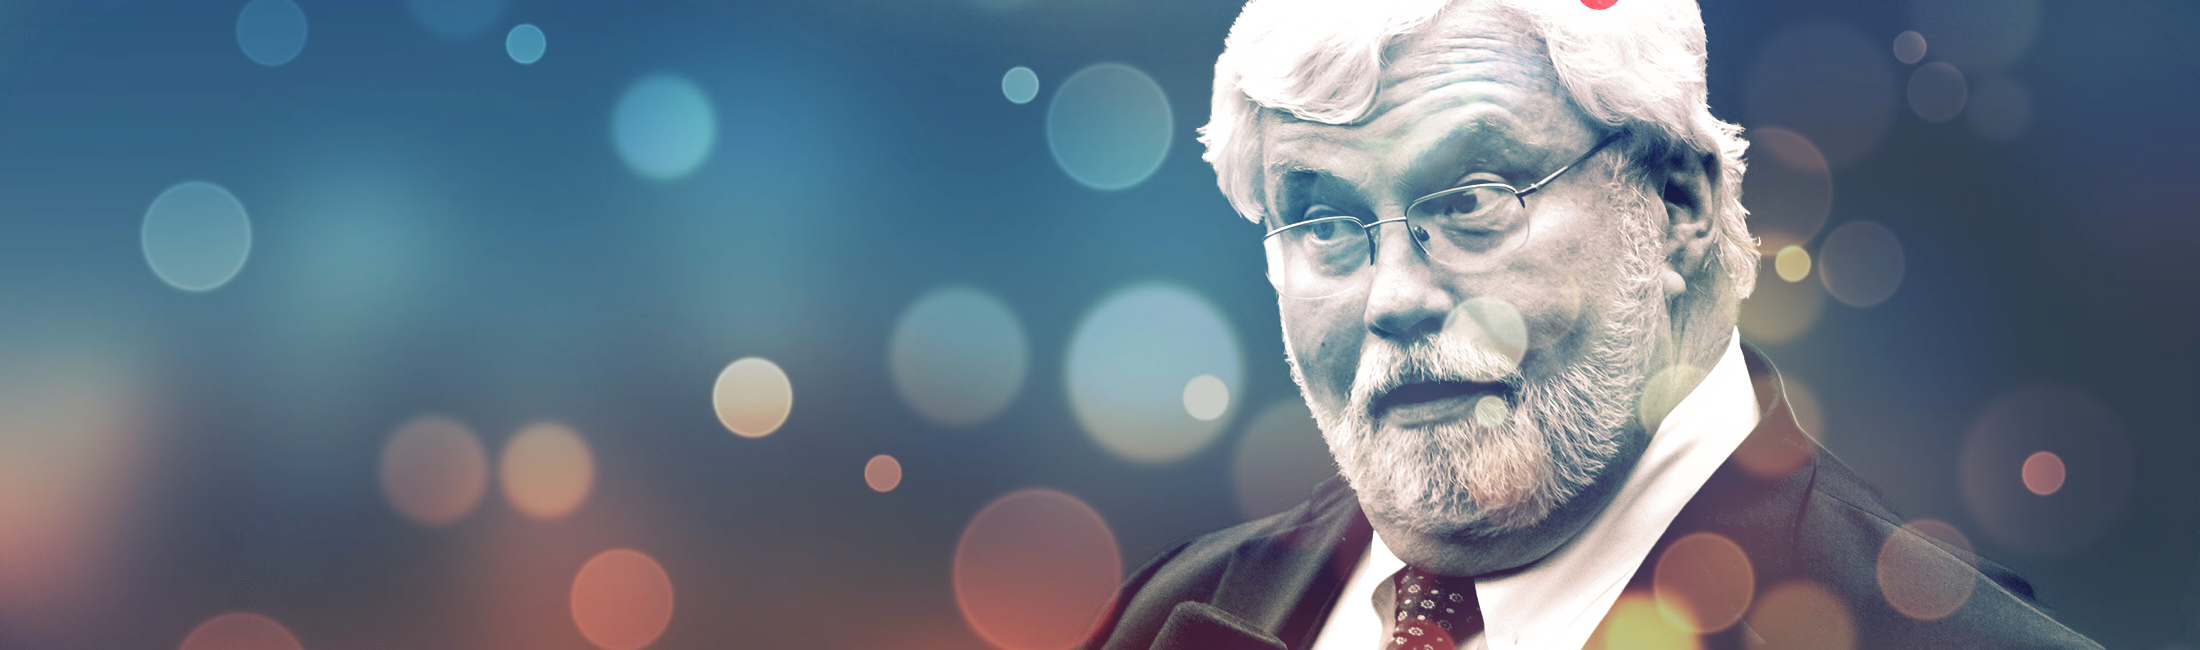 JACK-LATVALA-ALLEGATIONS-A.png